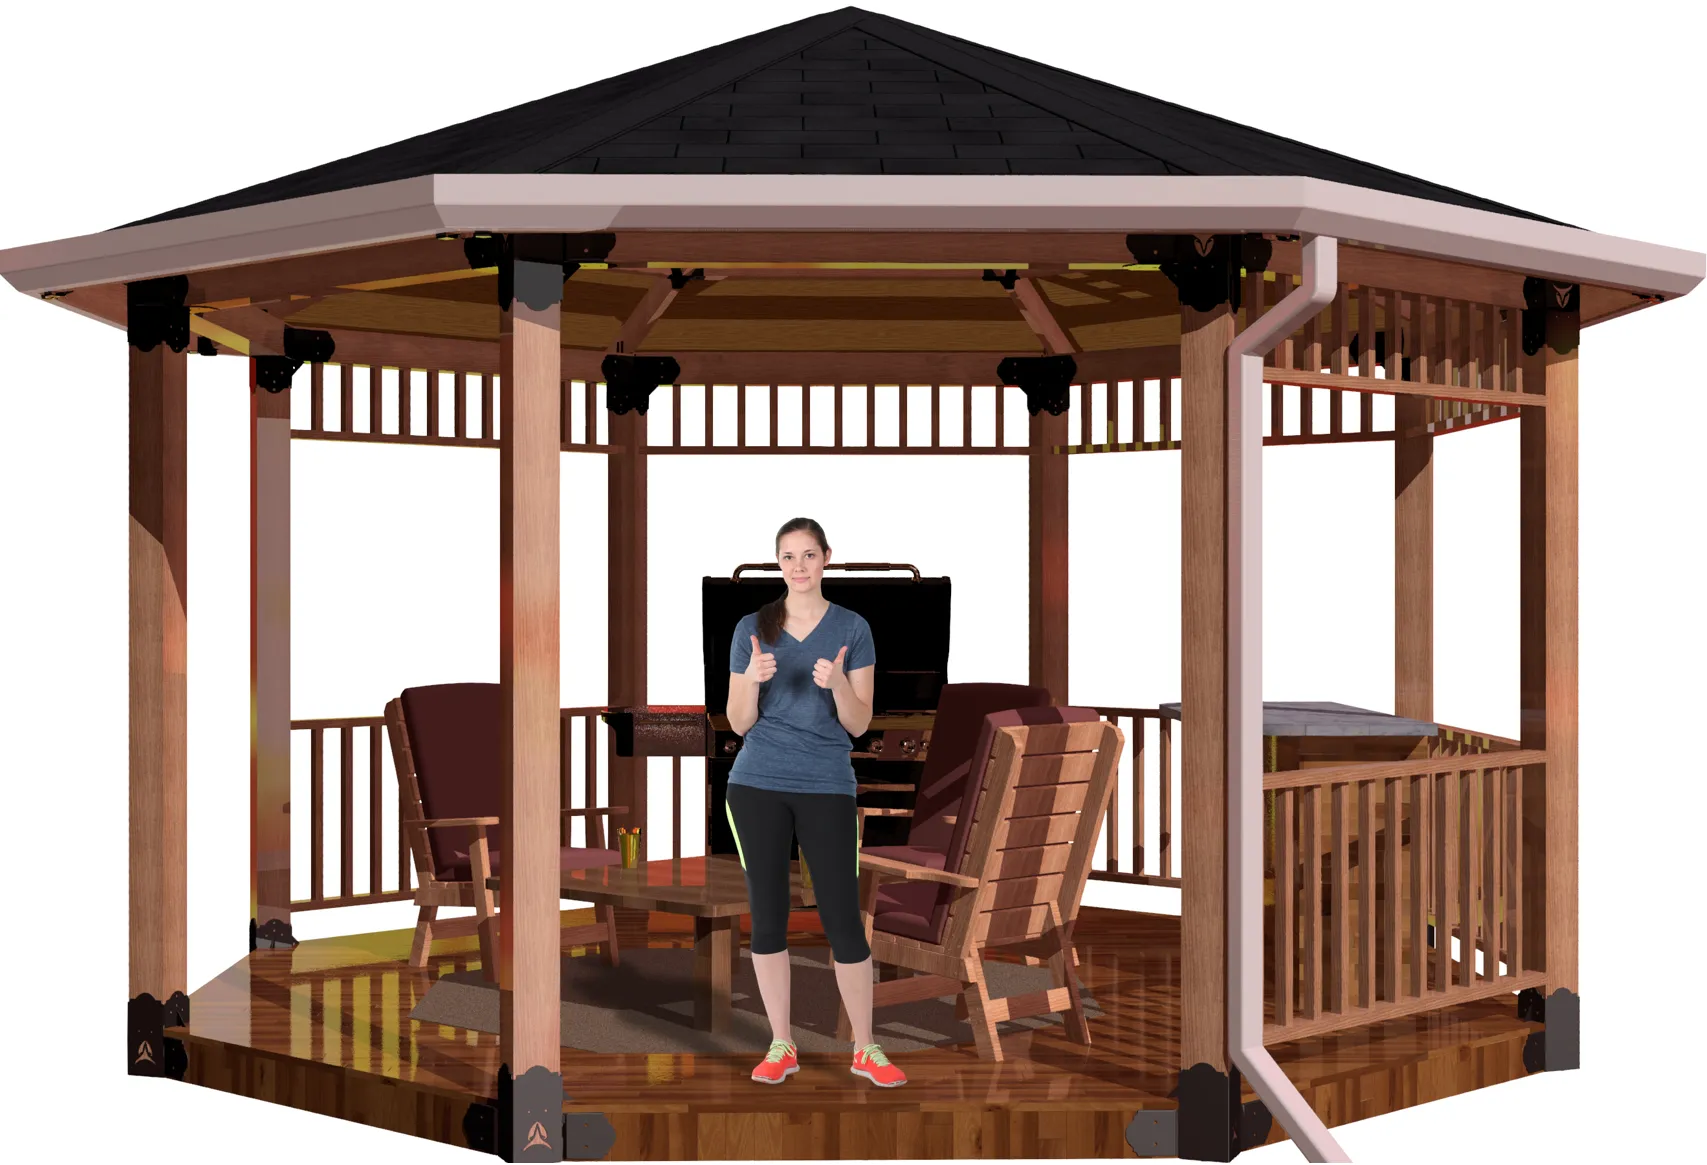 view of a 6X6 octagon patio cover with solid roof with a bar, barbecue and casual furniture and a girl standing inside